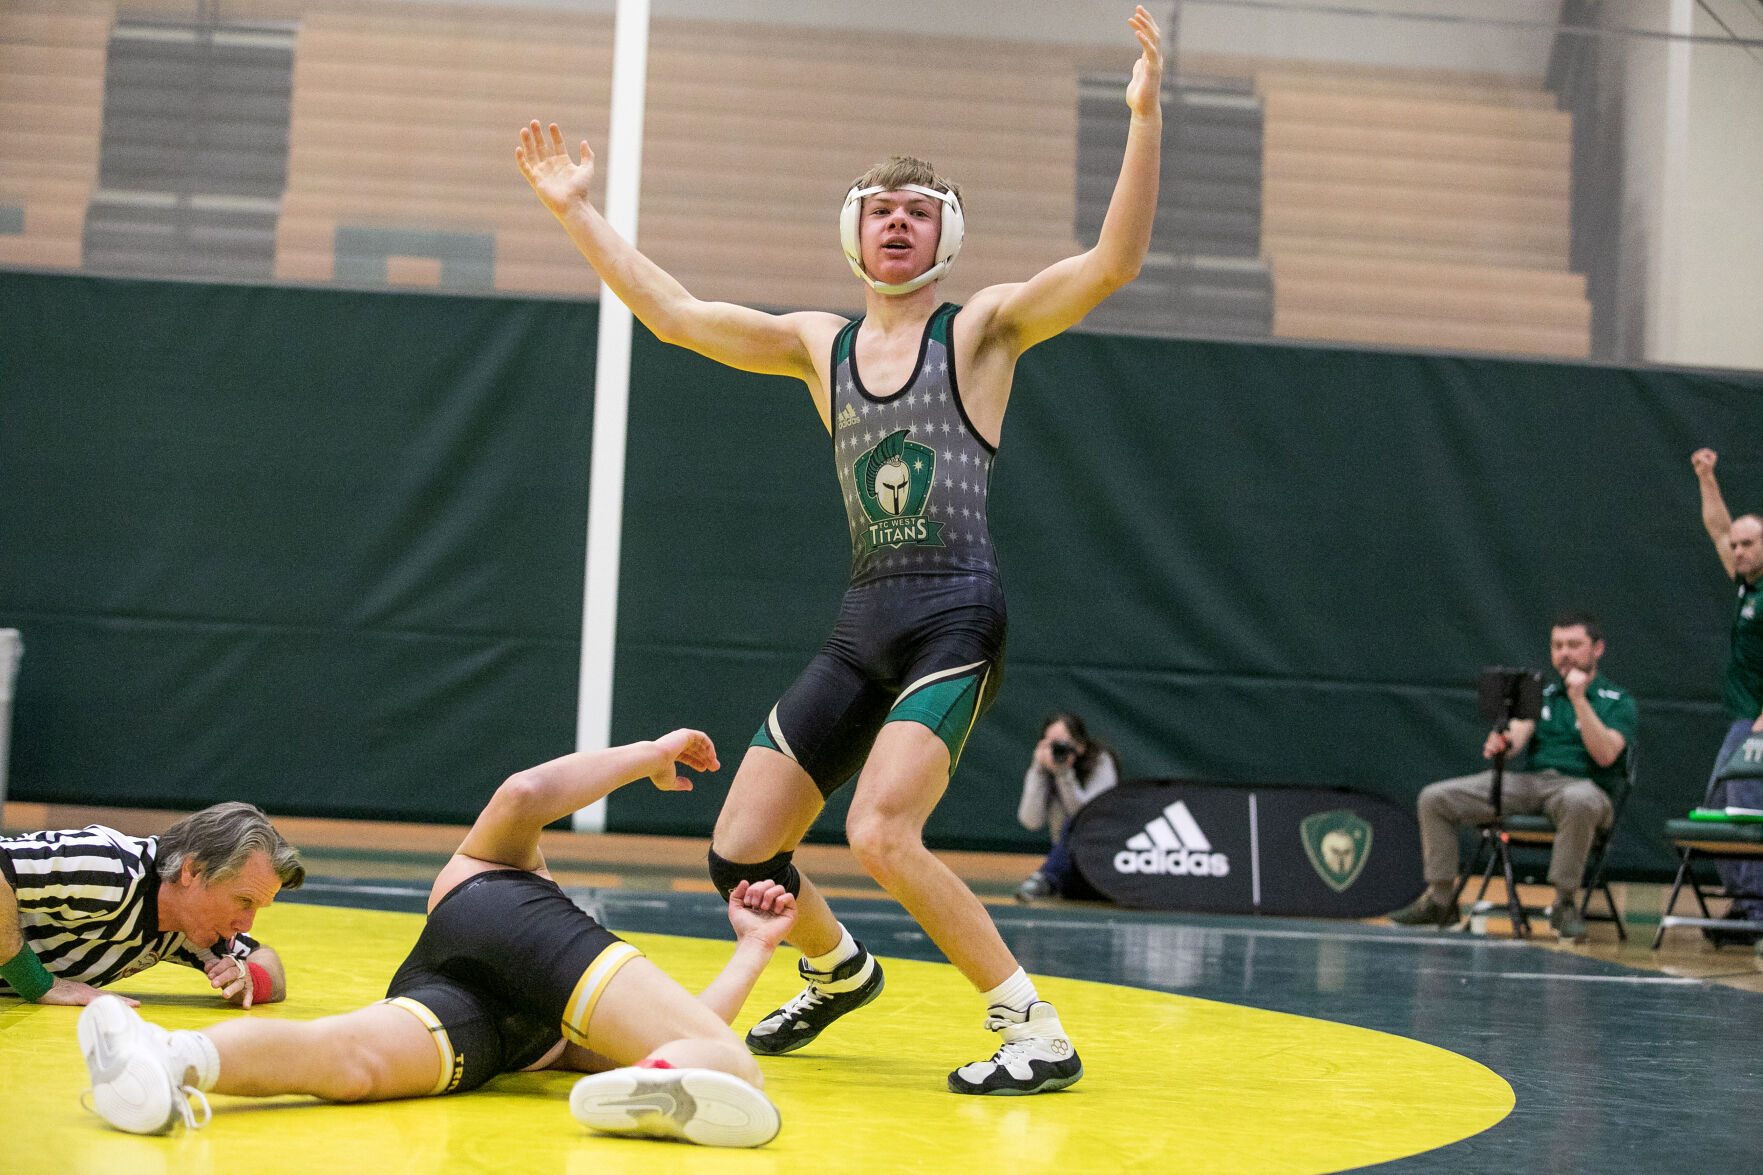 Traverse City West Wrestling Team Clinches Victory Over Traverse City Central in Division 1 Team District Finals